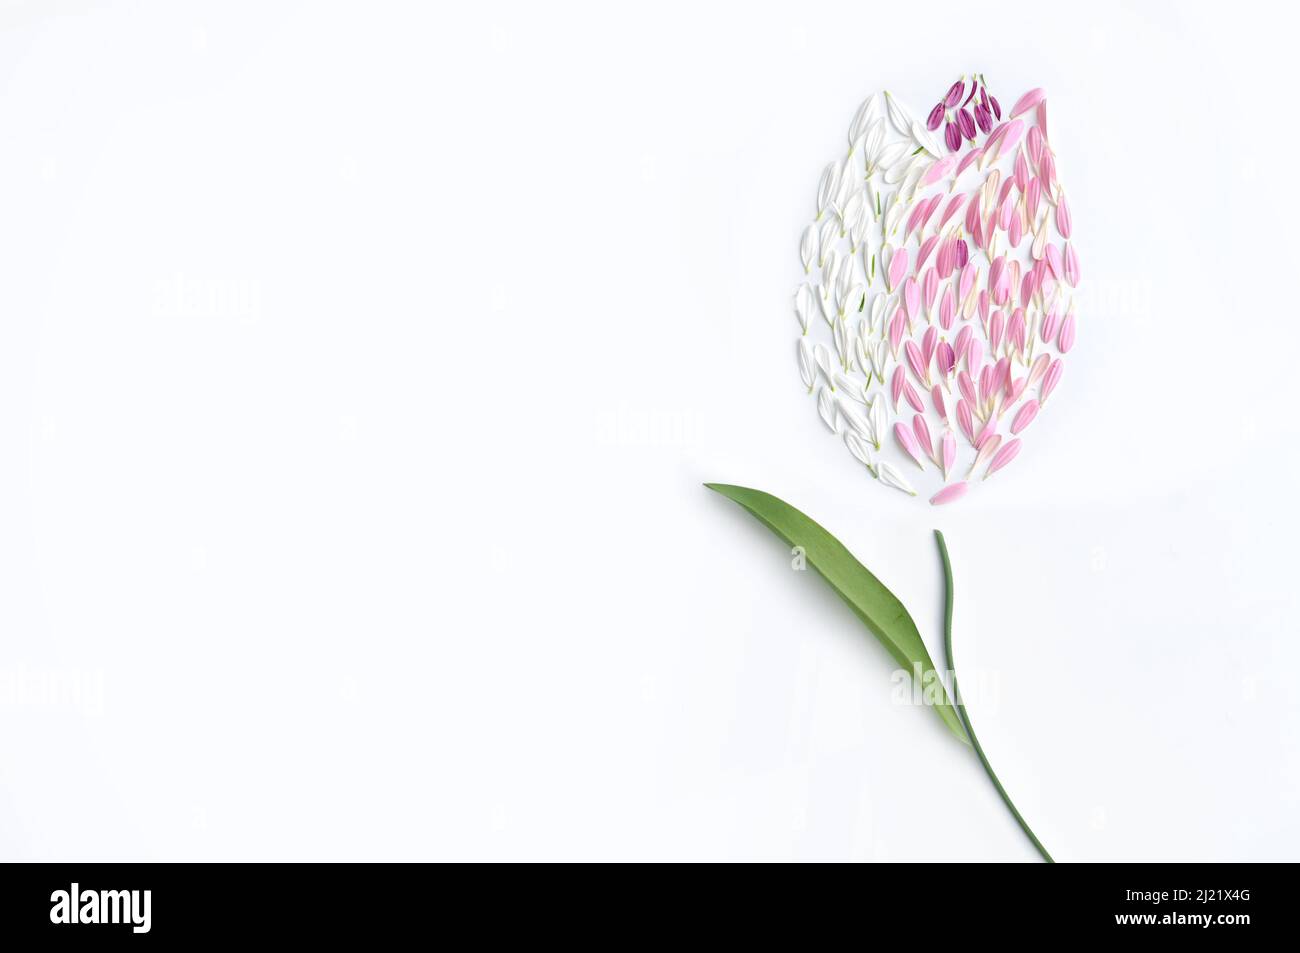 White; pink; purple flower petals in the shape of a spring tulip Stock Photo